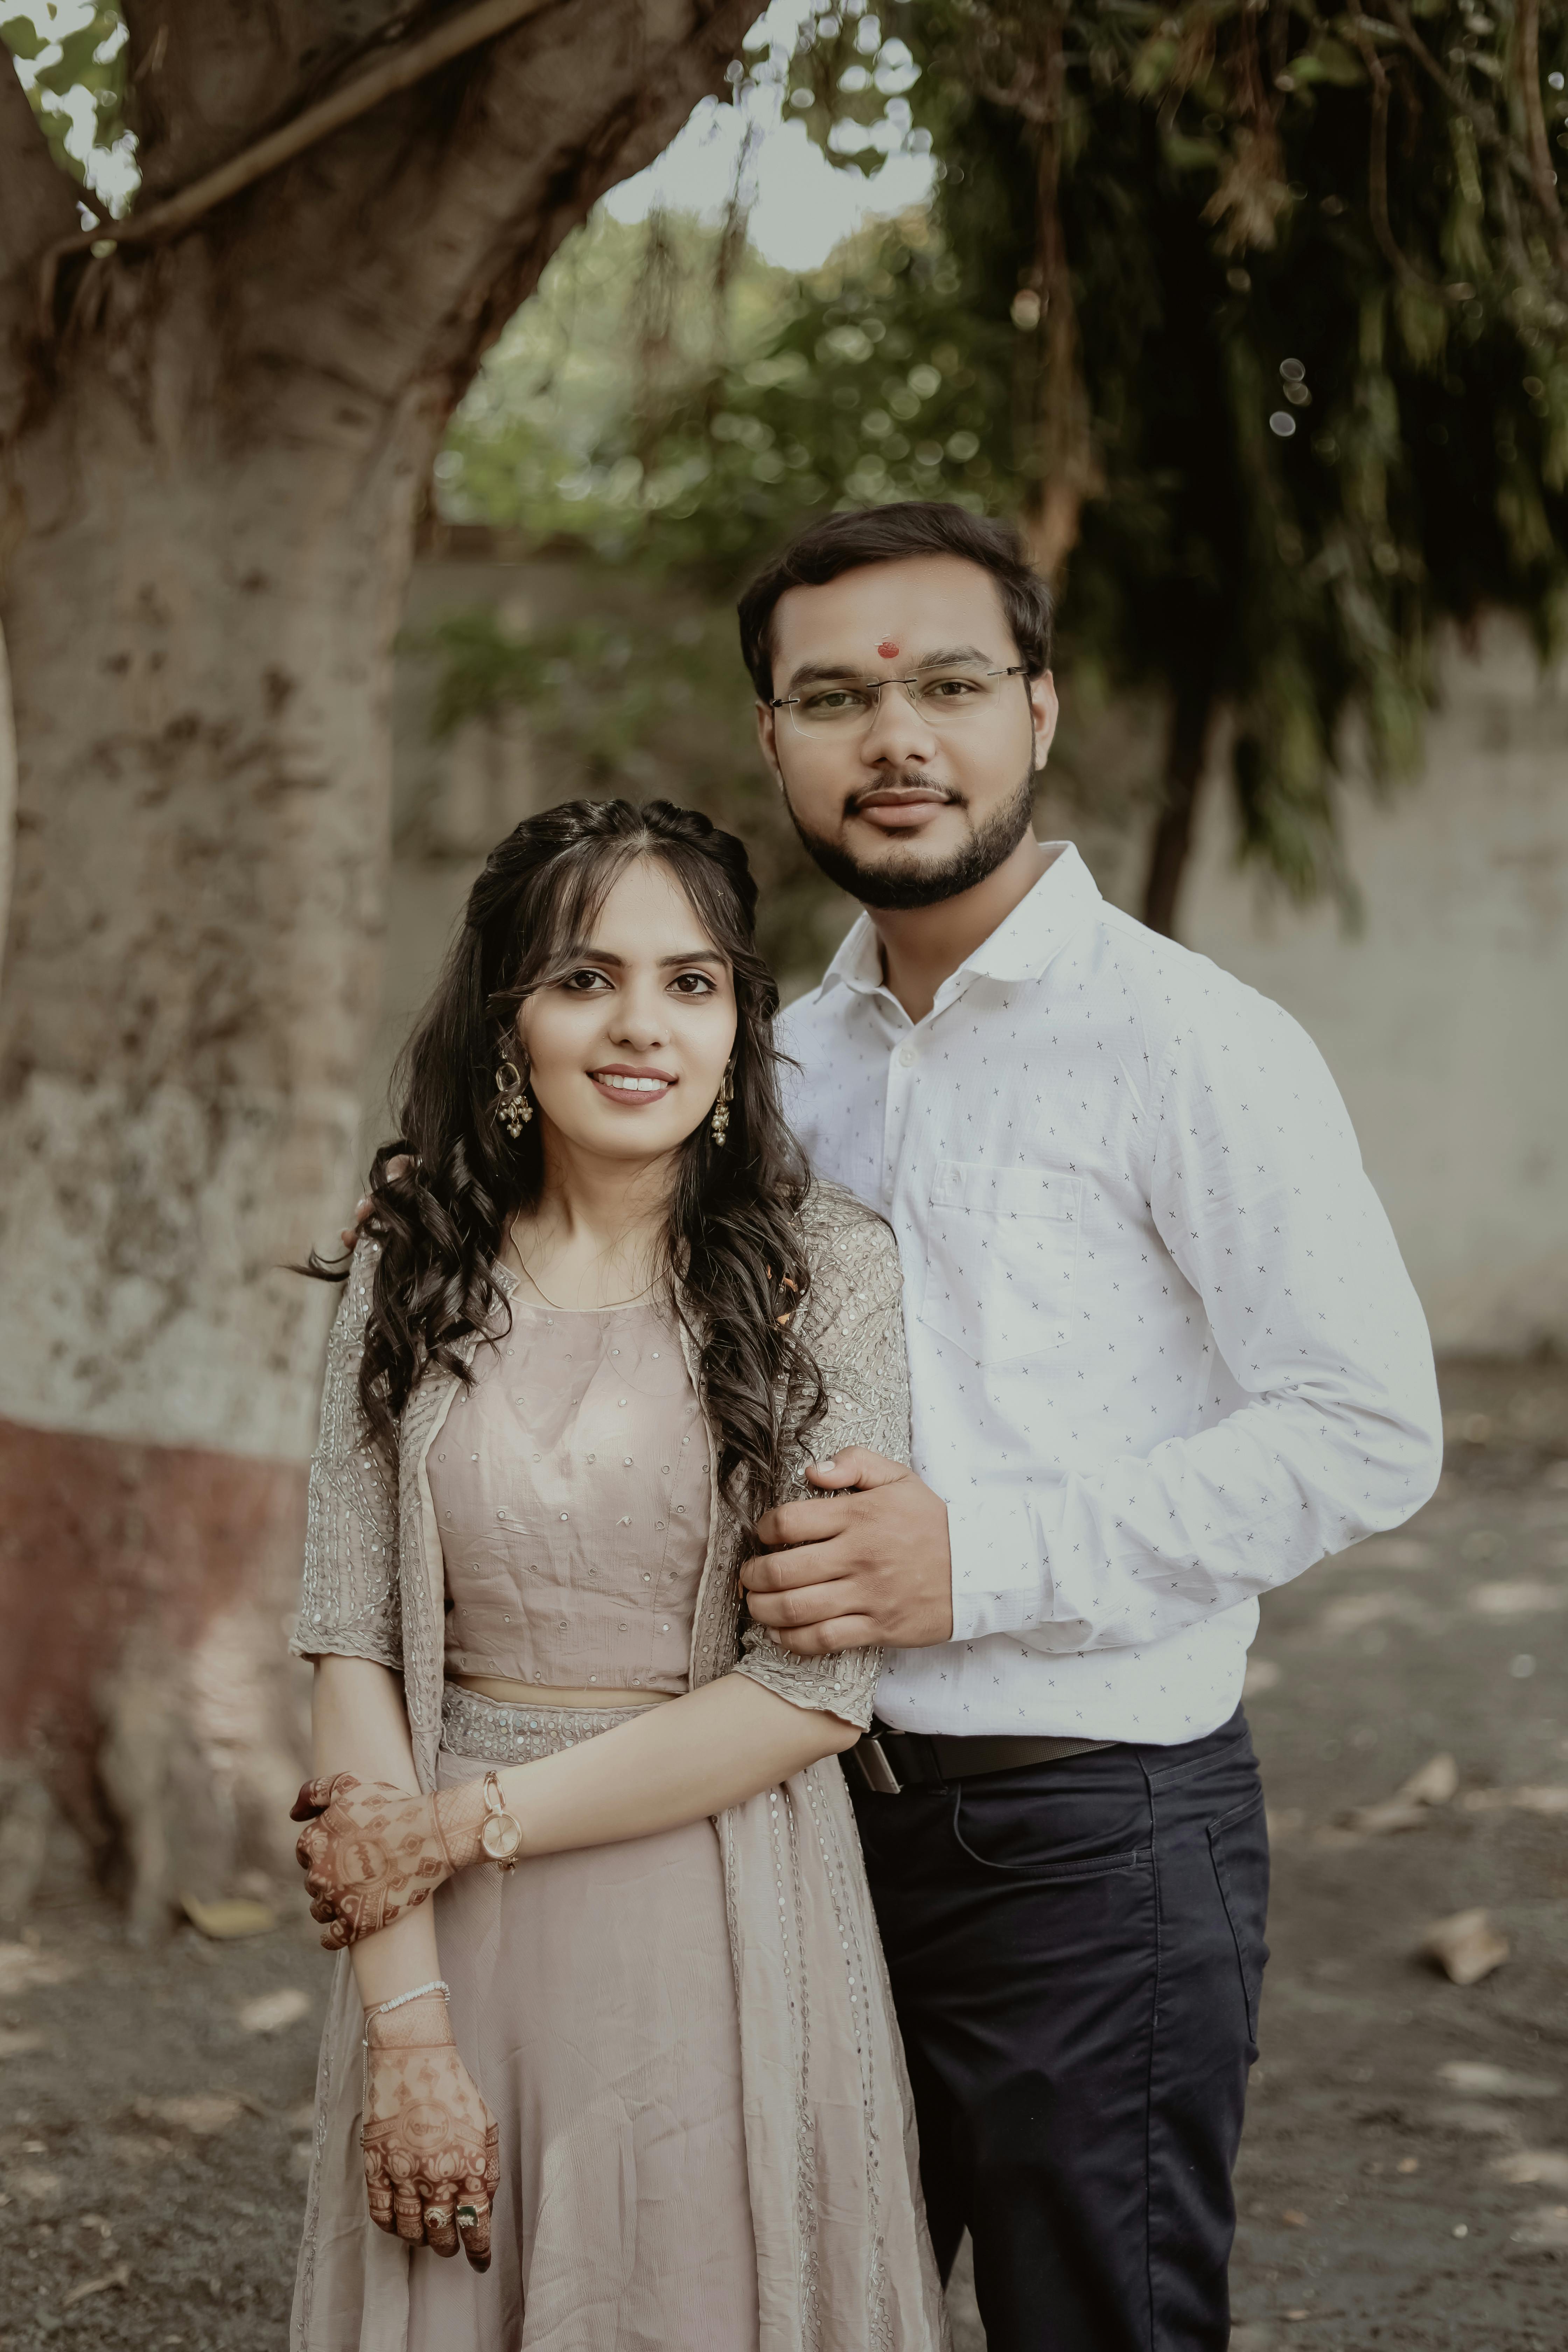 Free Photos - A Happy Moment Of A Young Couple Standing Next To Each Other,  Smiling And Posing For A Photo. The Background Is Filled With Several Other  People, Indicating That The